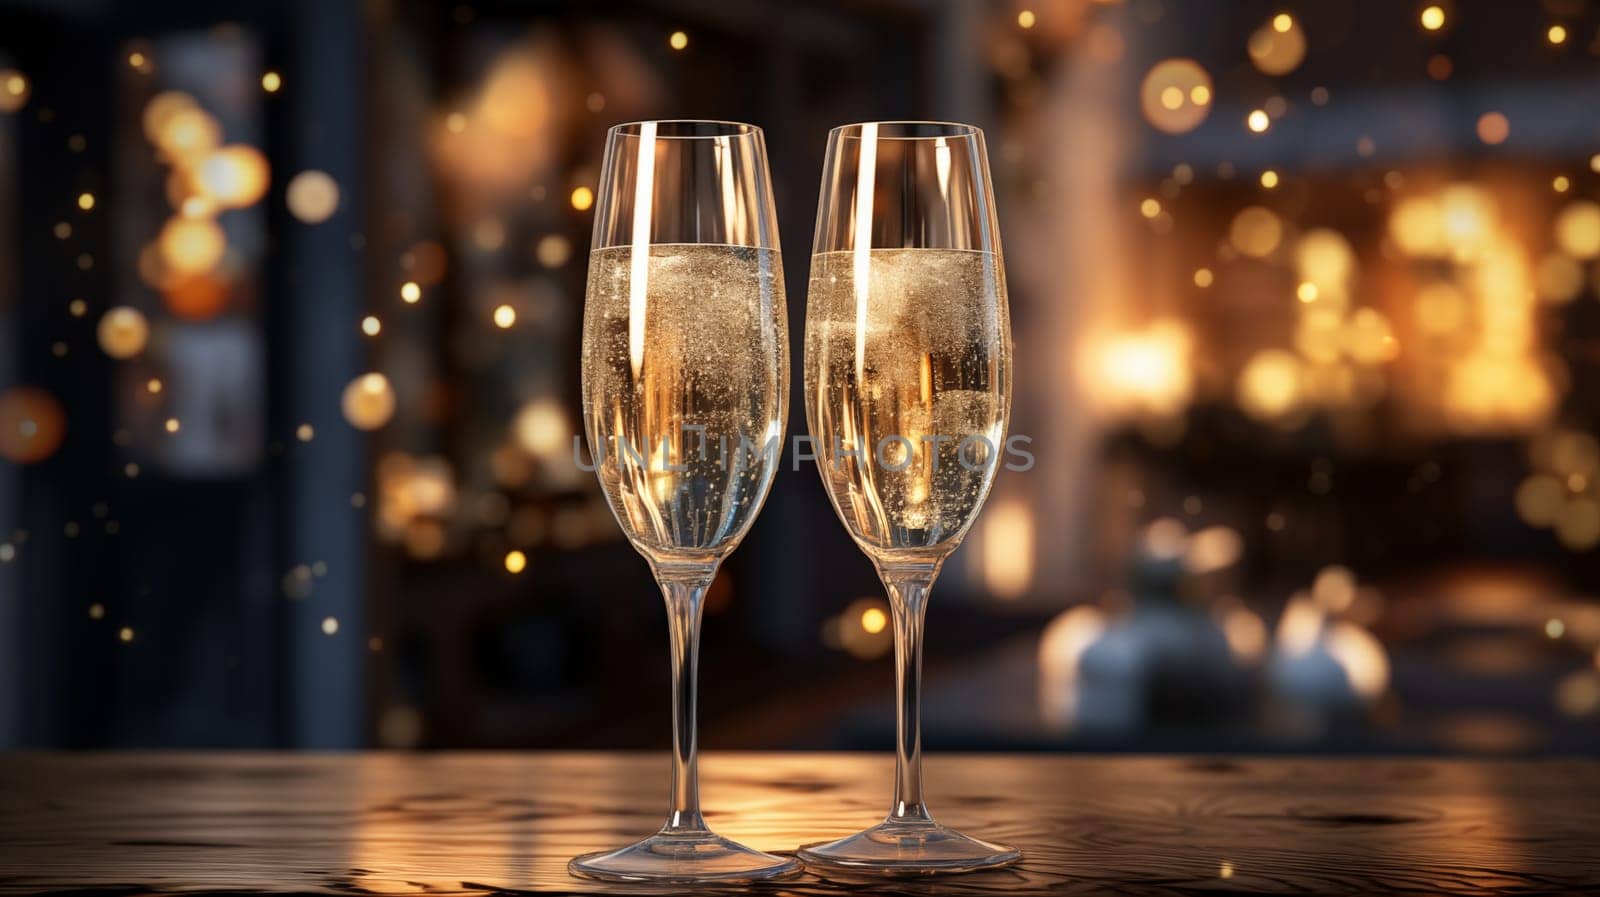 Two elegant glasses of champagne with particles of gold stand on the wooden table in the evening, surrounded by golden bokeh lights.